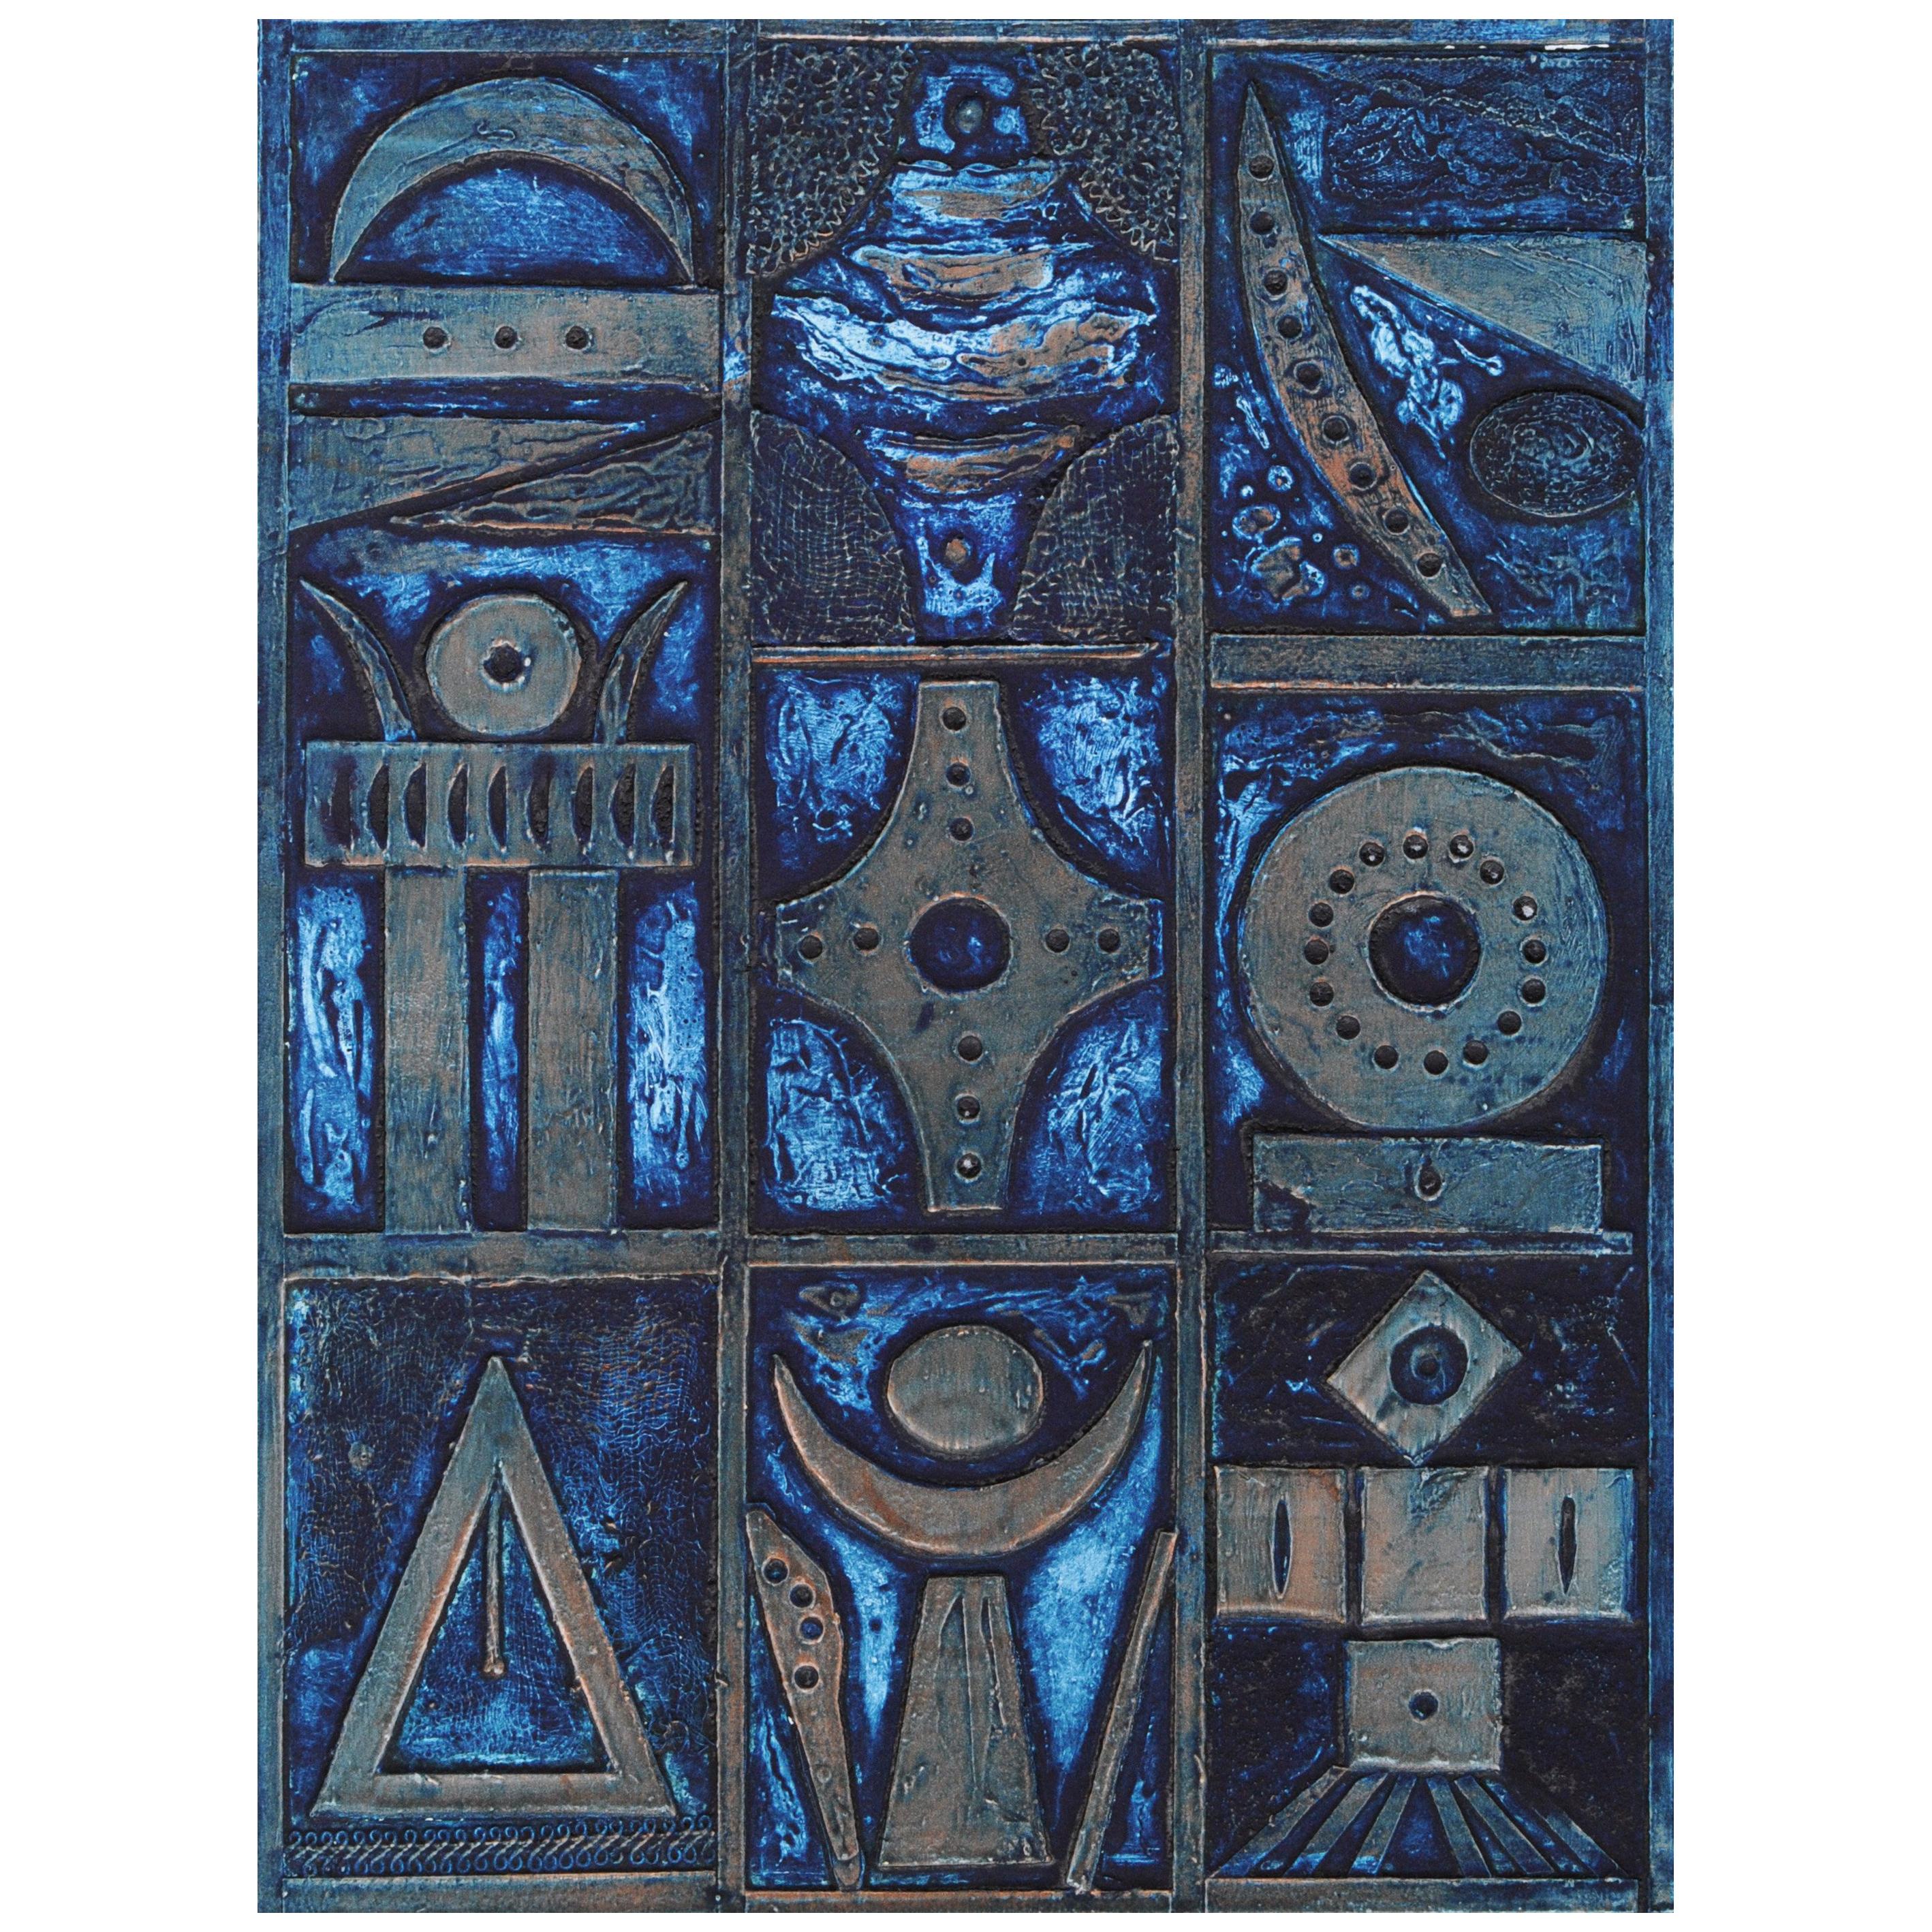 Noche Crist Embossed Work on Paper "Blue Collagraph", 1970